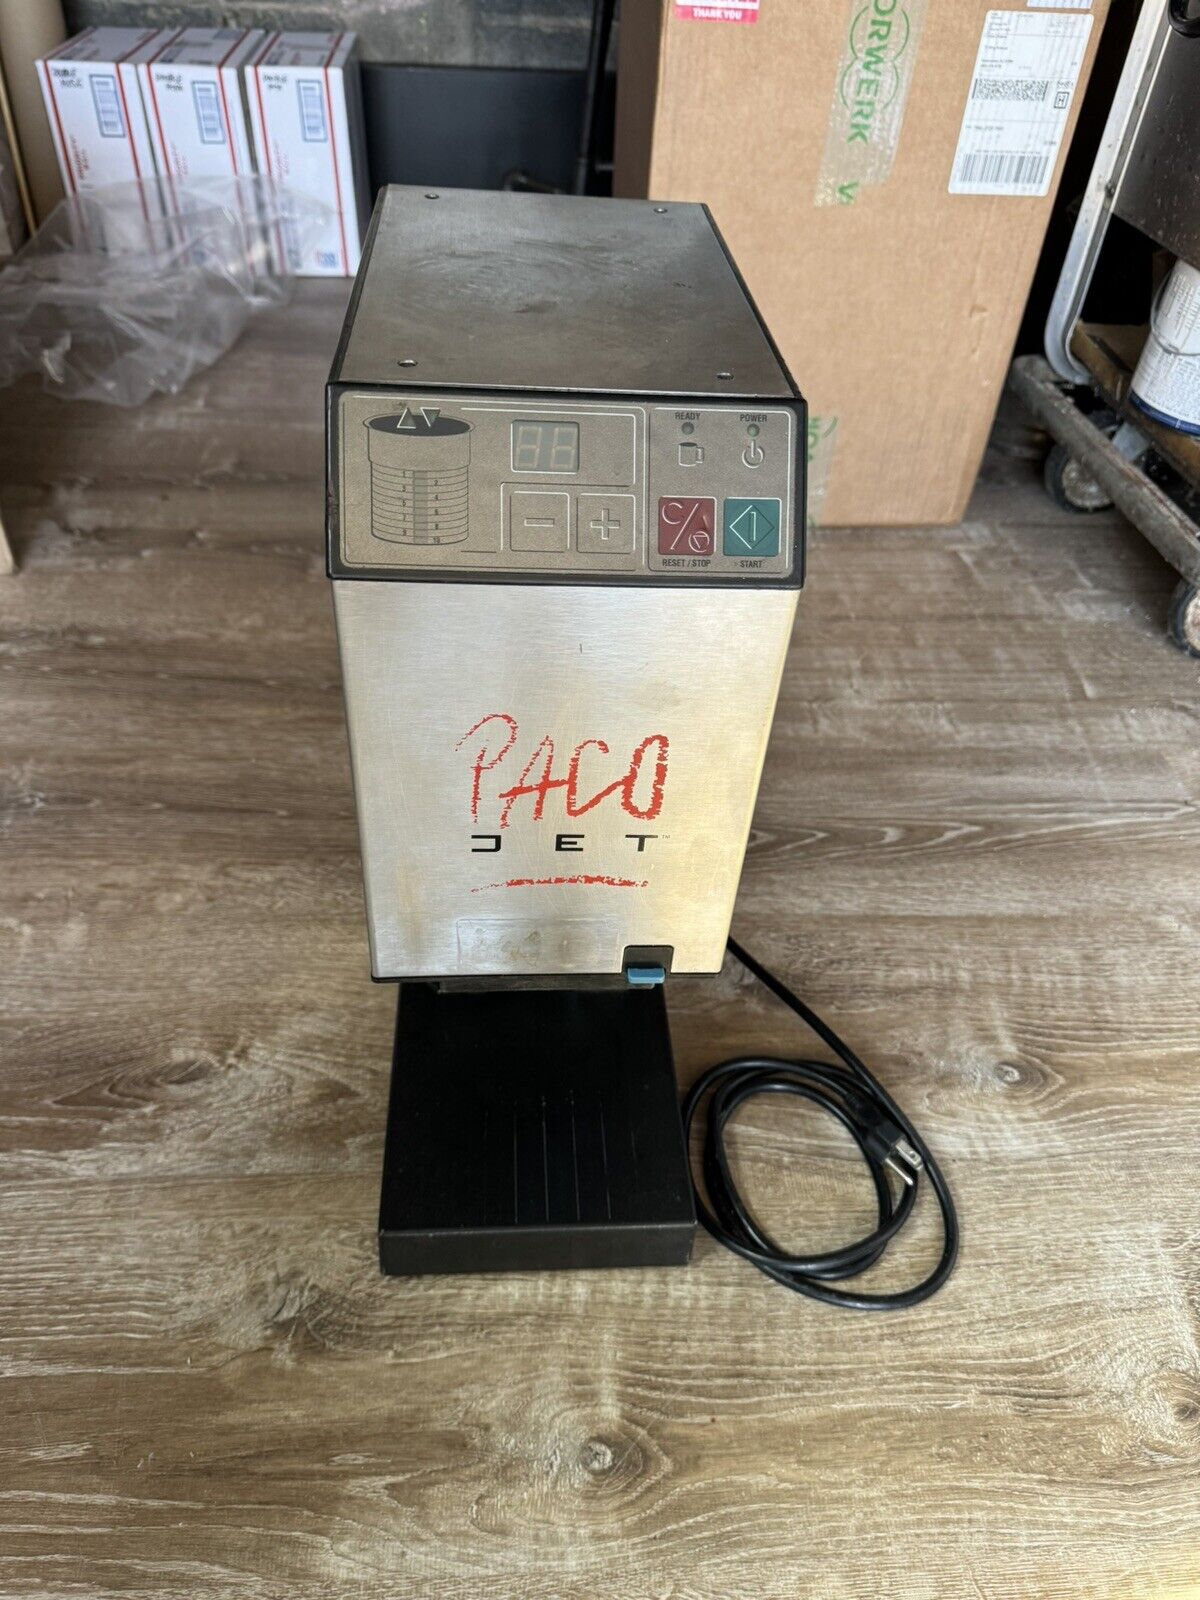 PACOJET PJ1 NON WORKING FOR PARTS AND REPAIRS